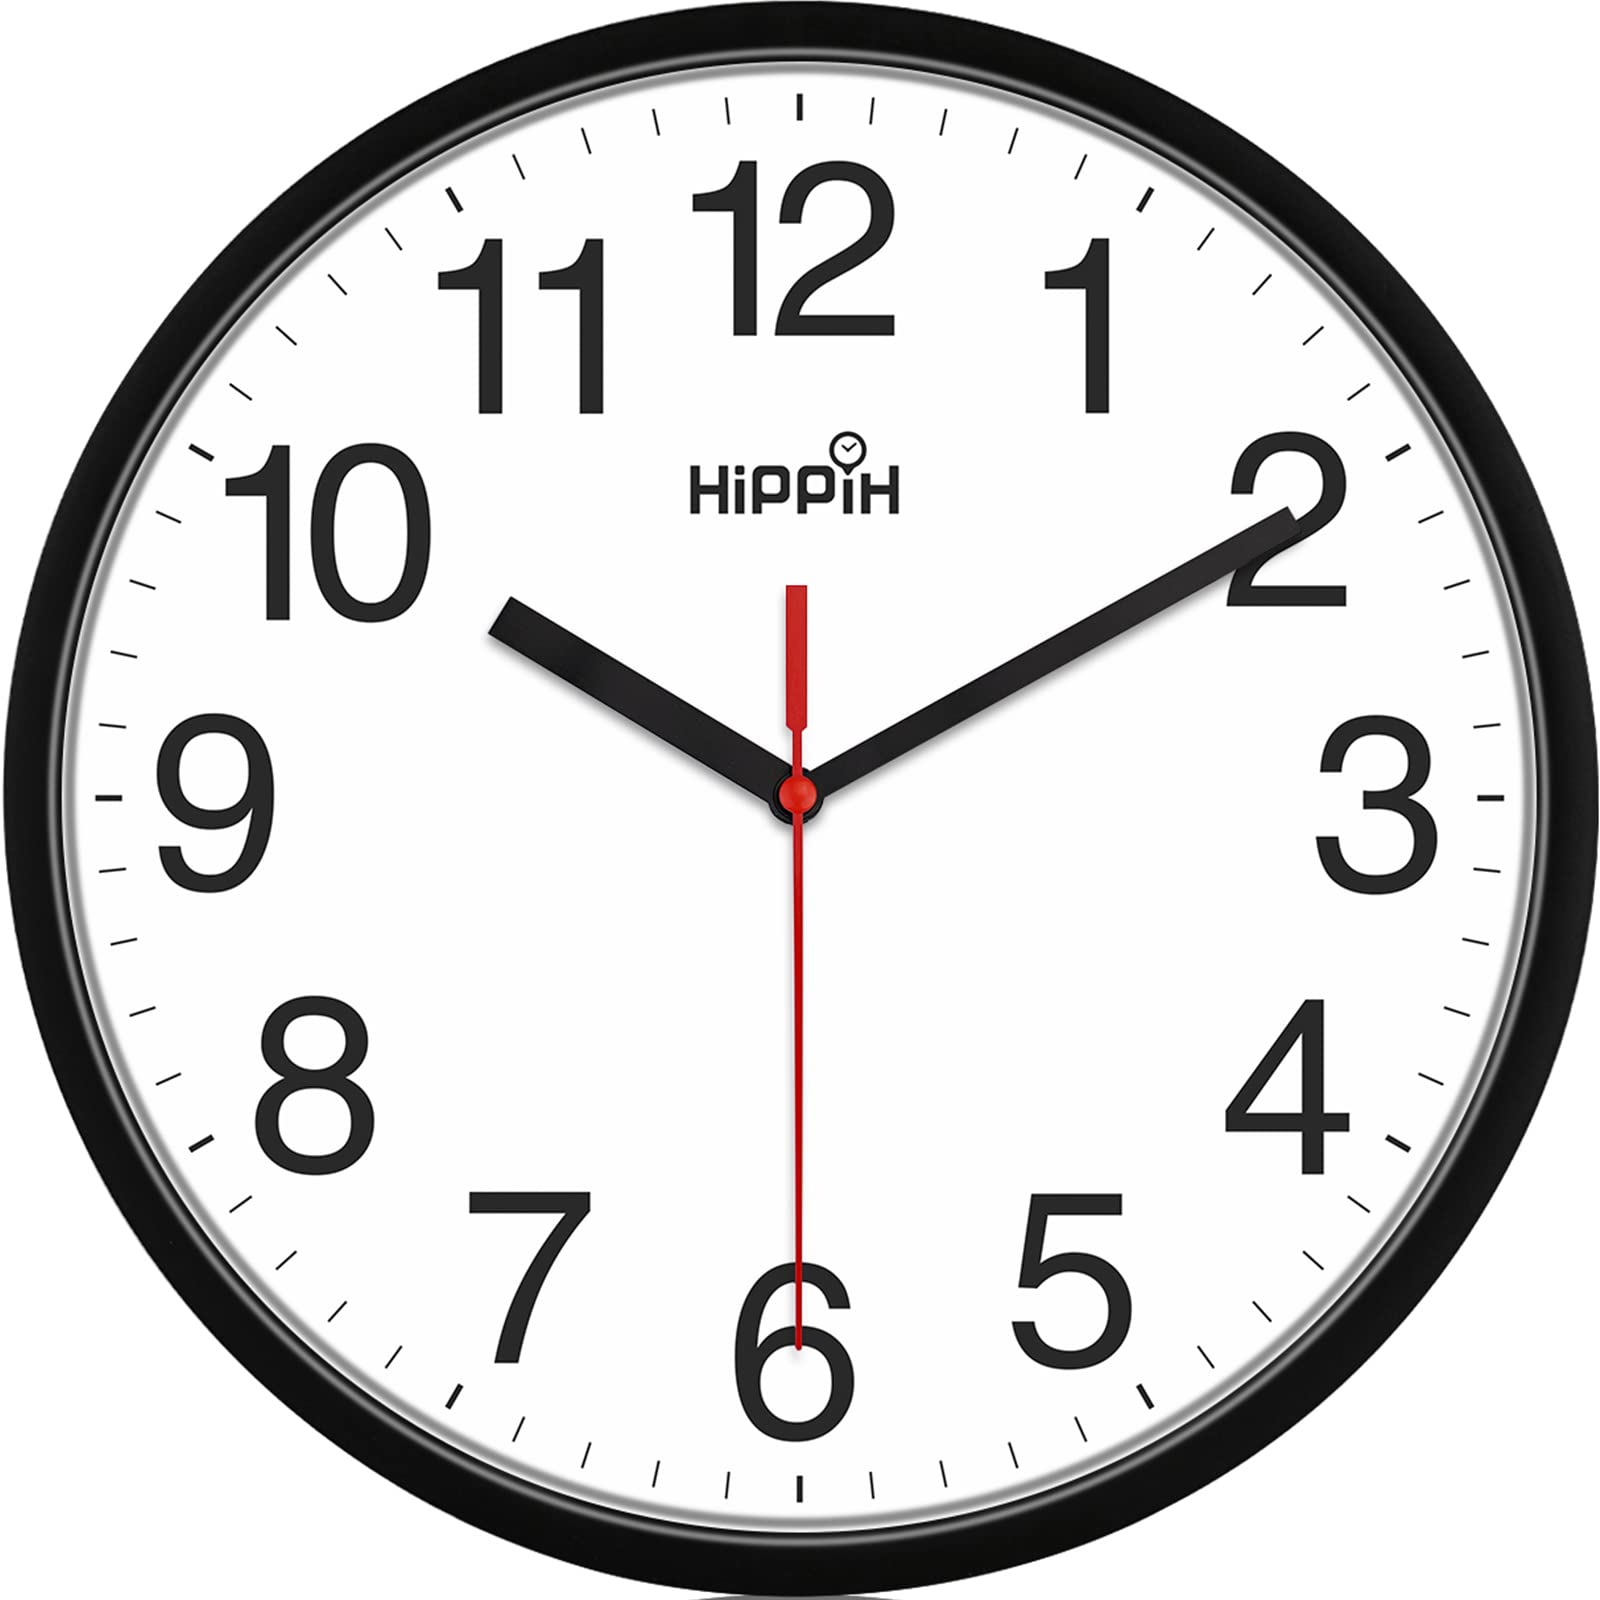 HIPPIH Clock Black Wall Clock Silent Non Ticking Quality Quartz - 10 Inch Round Easy to Read for Home Office & School Decor Clock Black 1